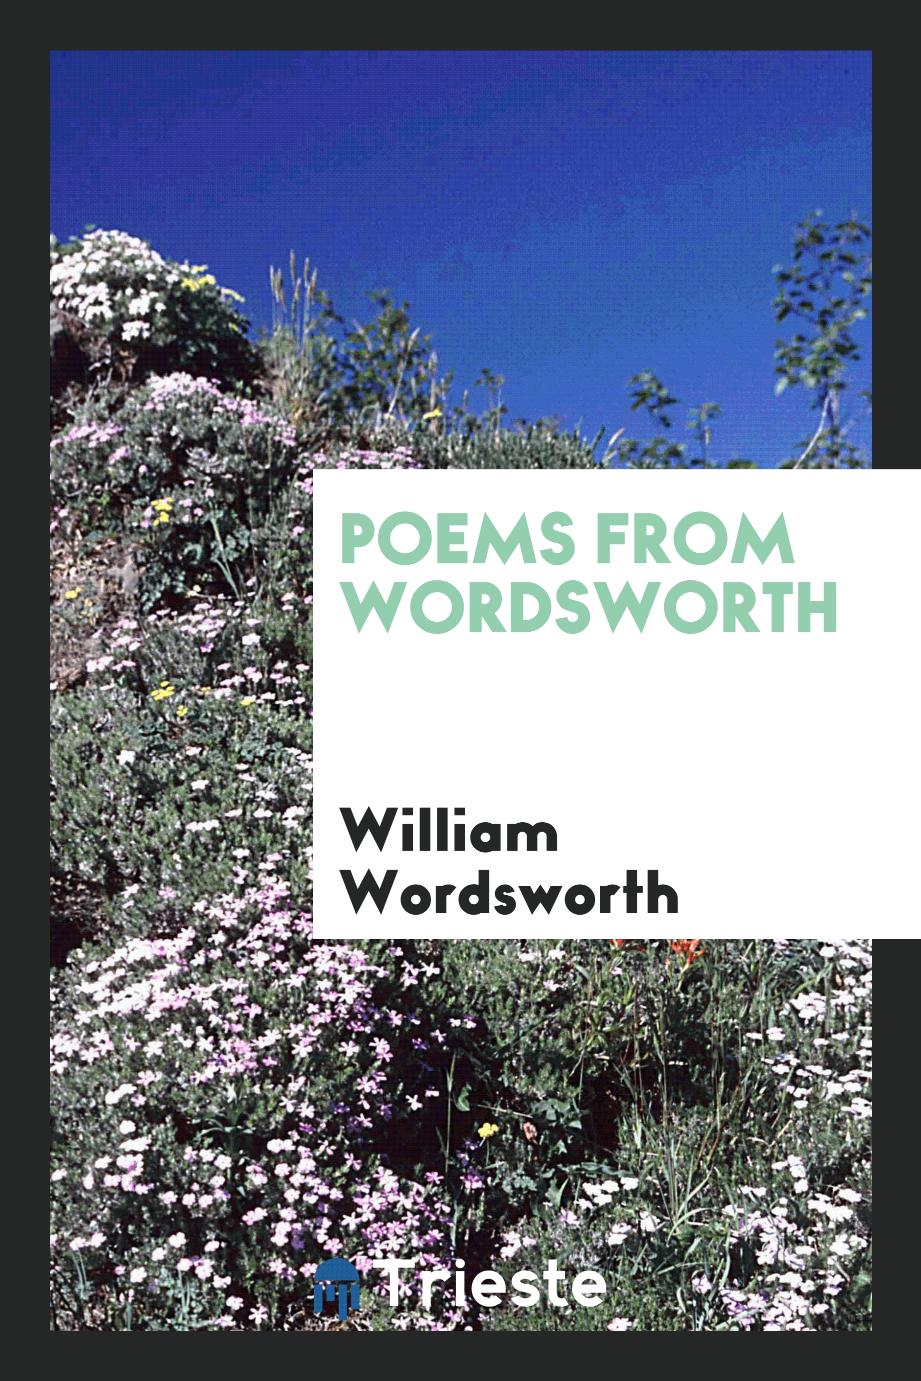 Poems from Wordsworth